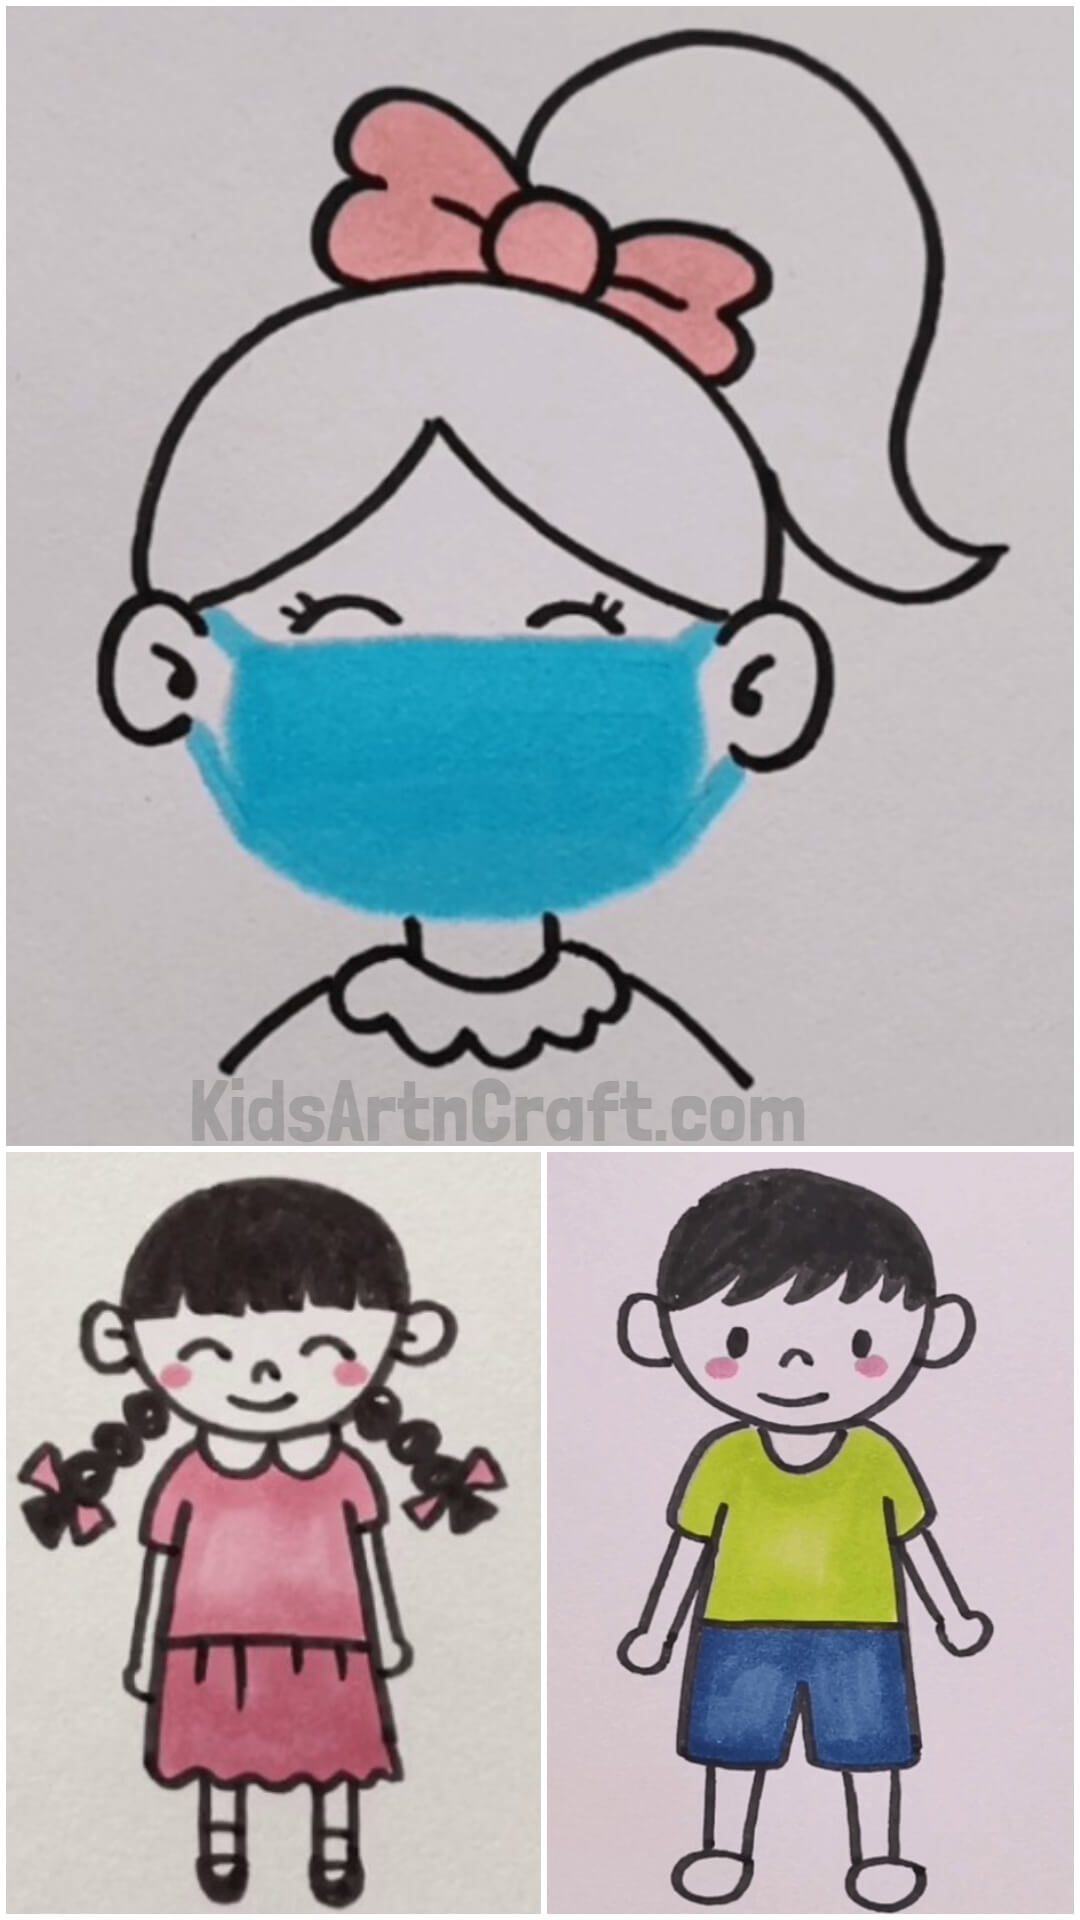 Boy & Girl Drawing Ideas for Kids